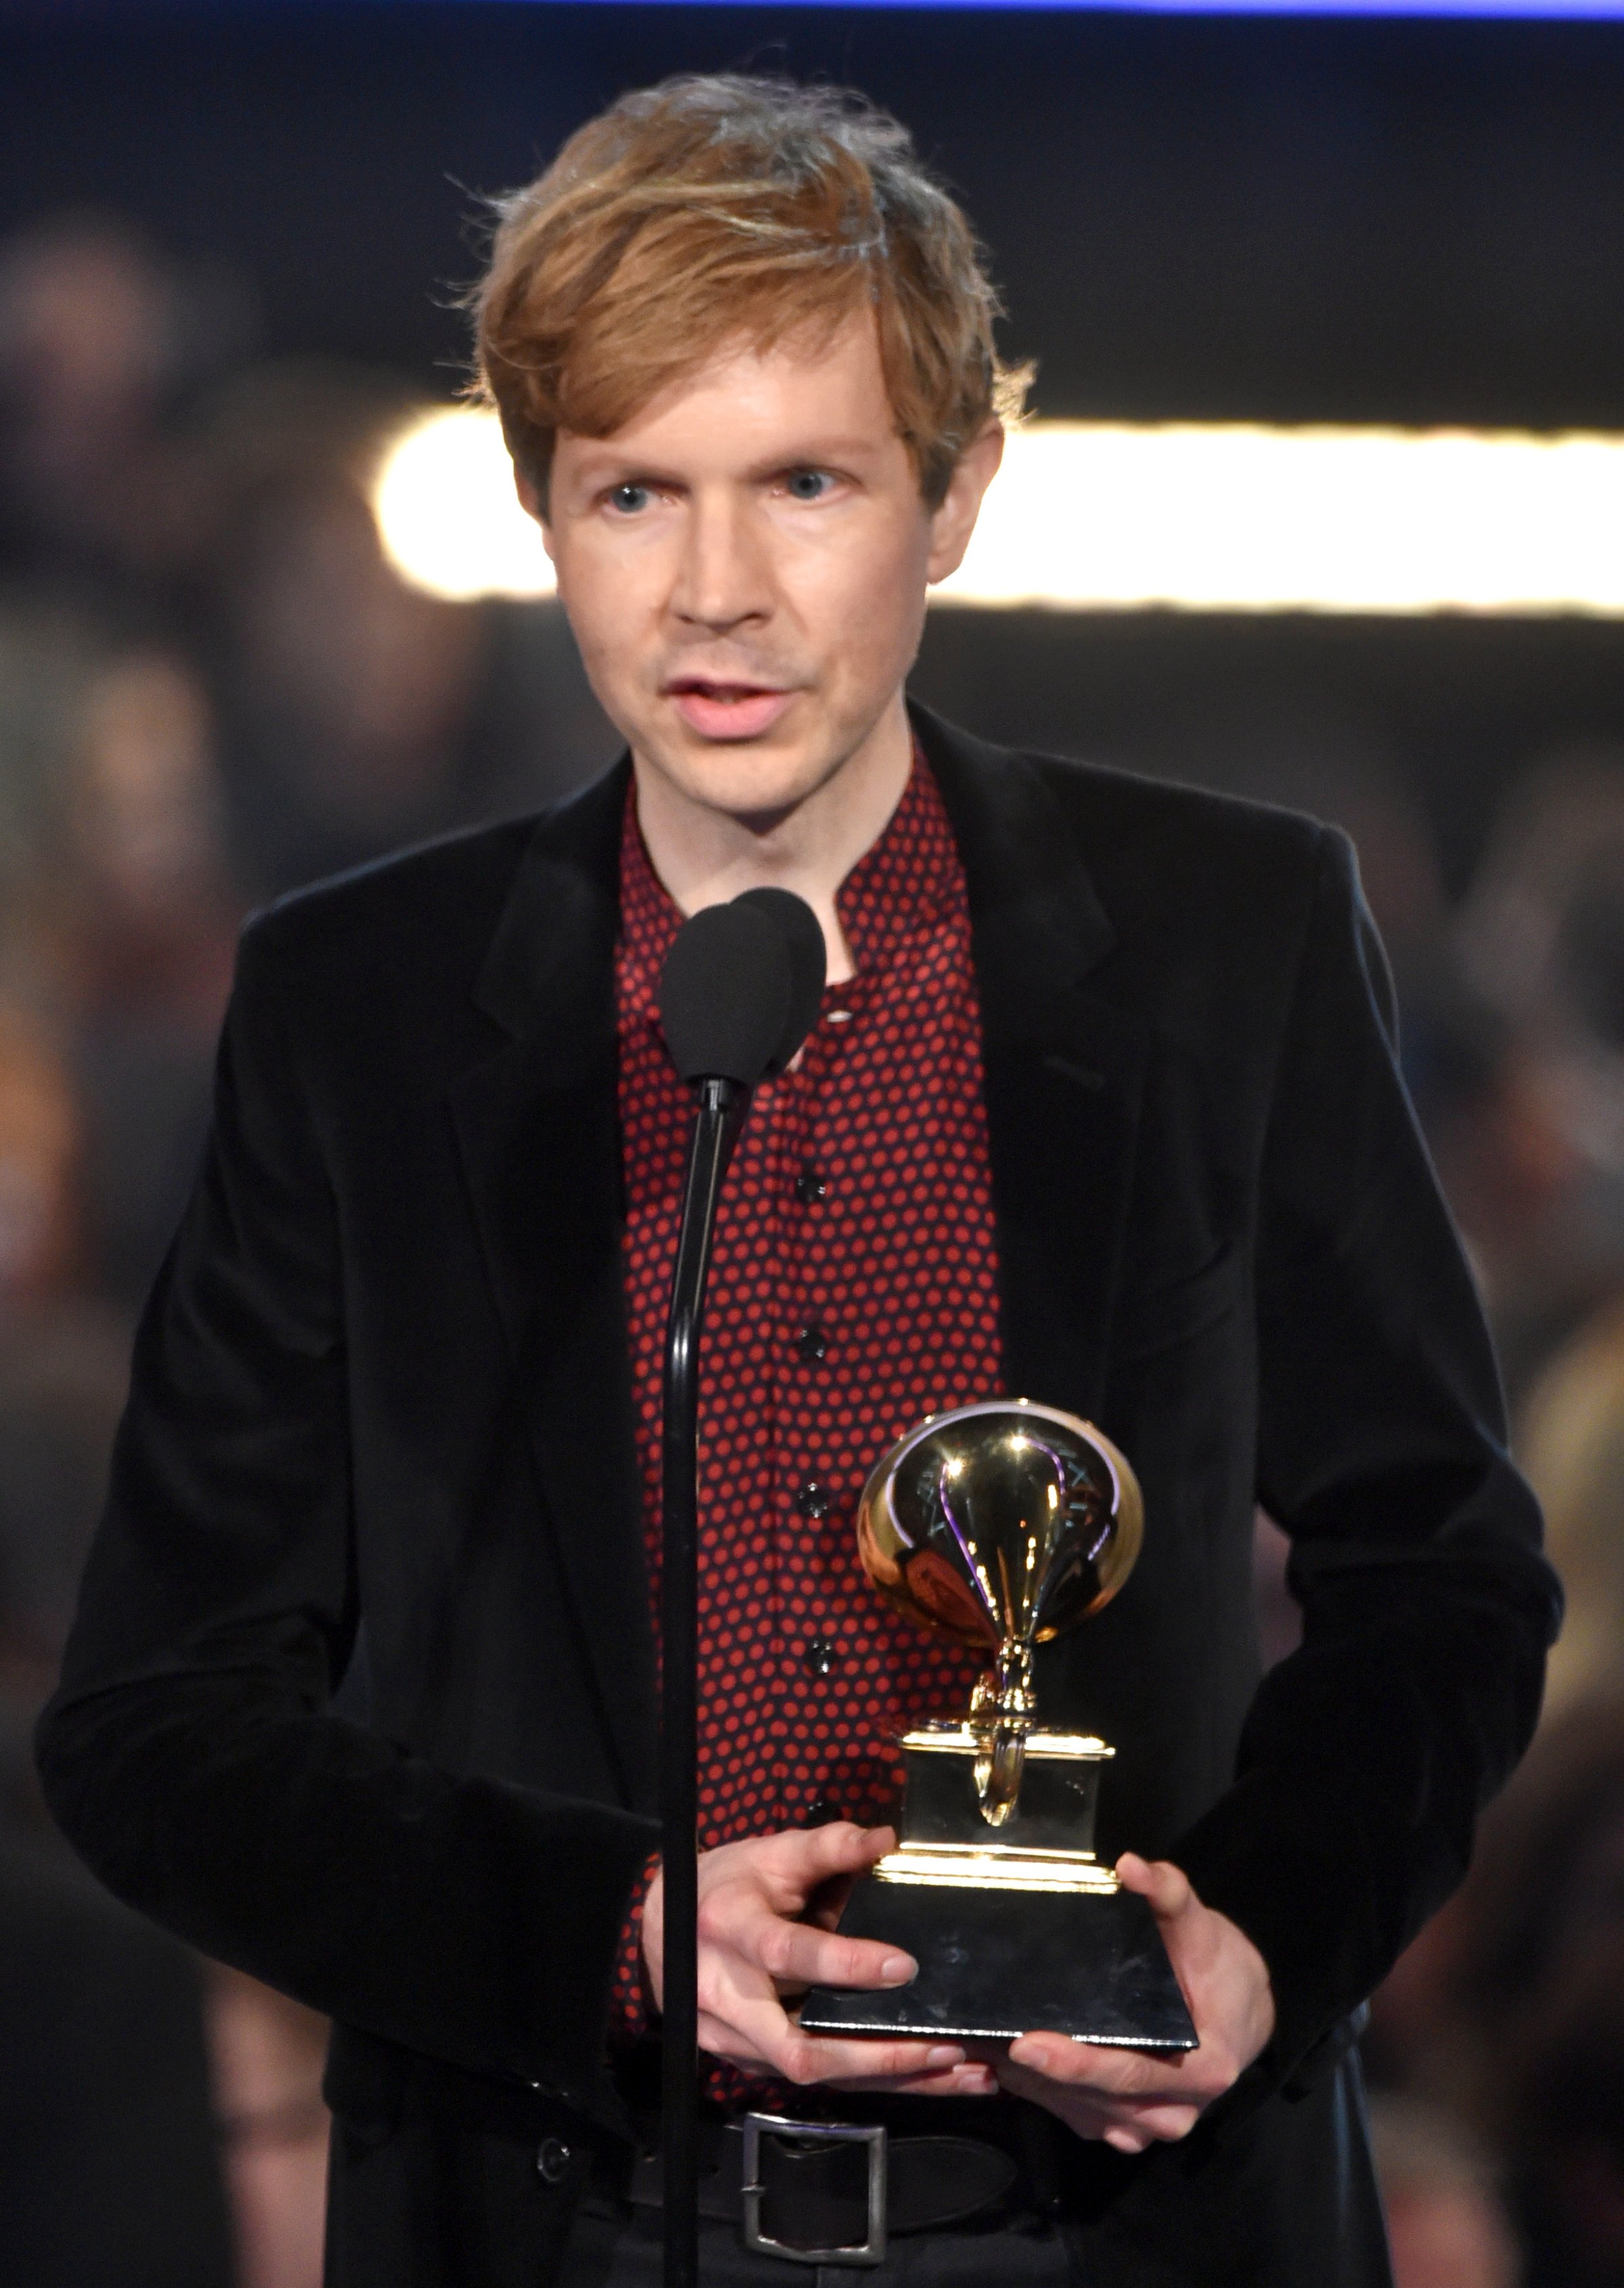 Beck receives an award onstage during The 57th Annual GRAMMY Awards at the STAPLES Center on Feb. 8, 2015 in Los Angeles.